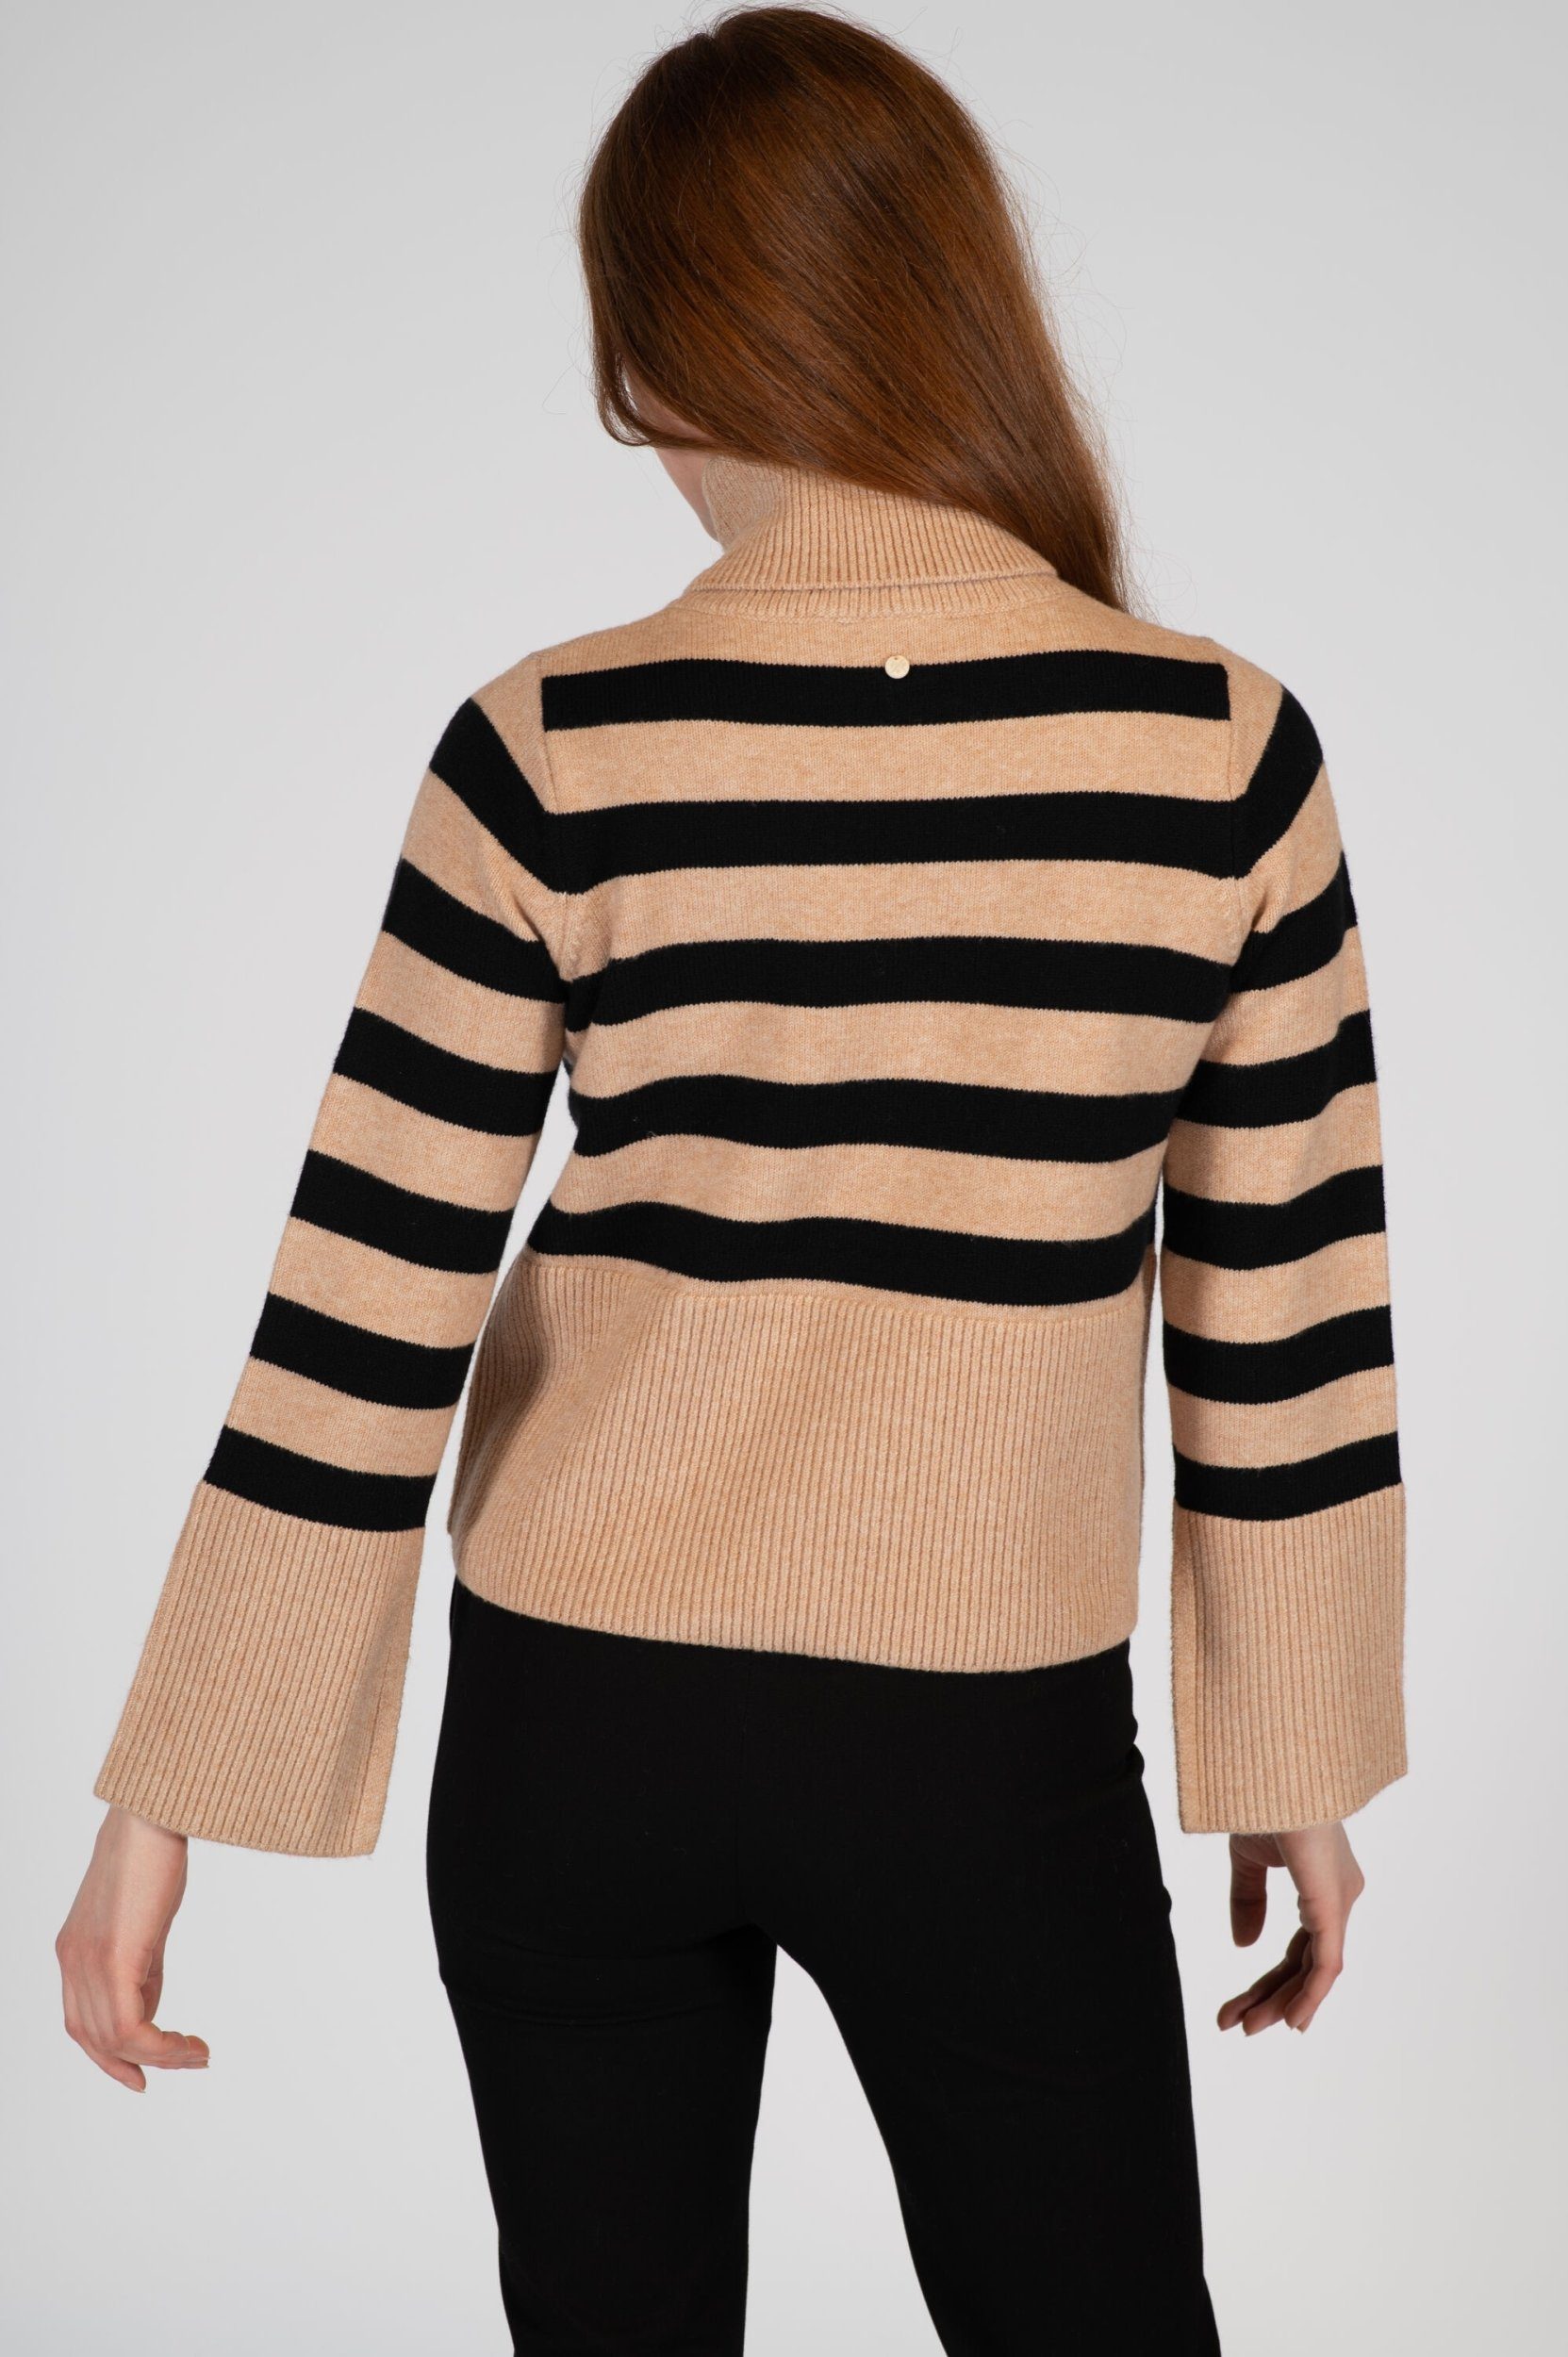 Turtleneck FASHION PEOPLE striped, Rundhalspullover Cropped THE